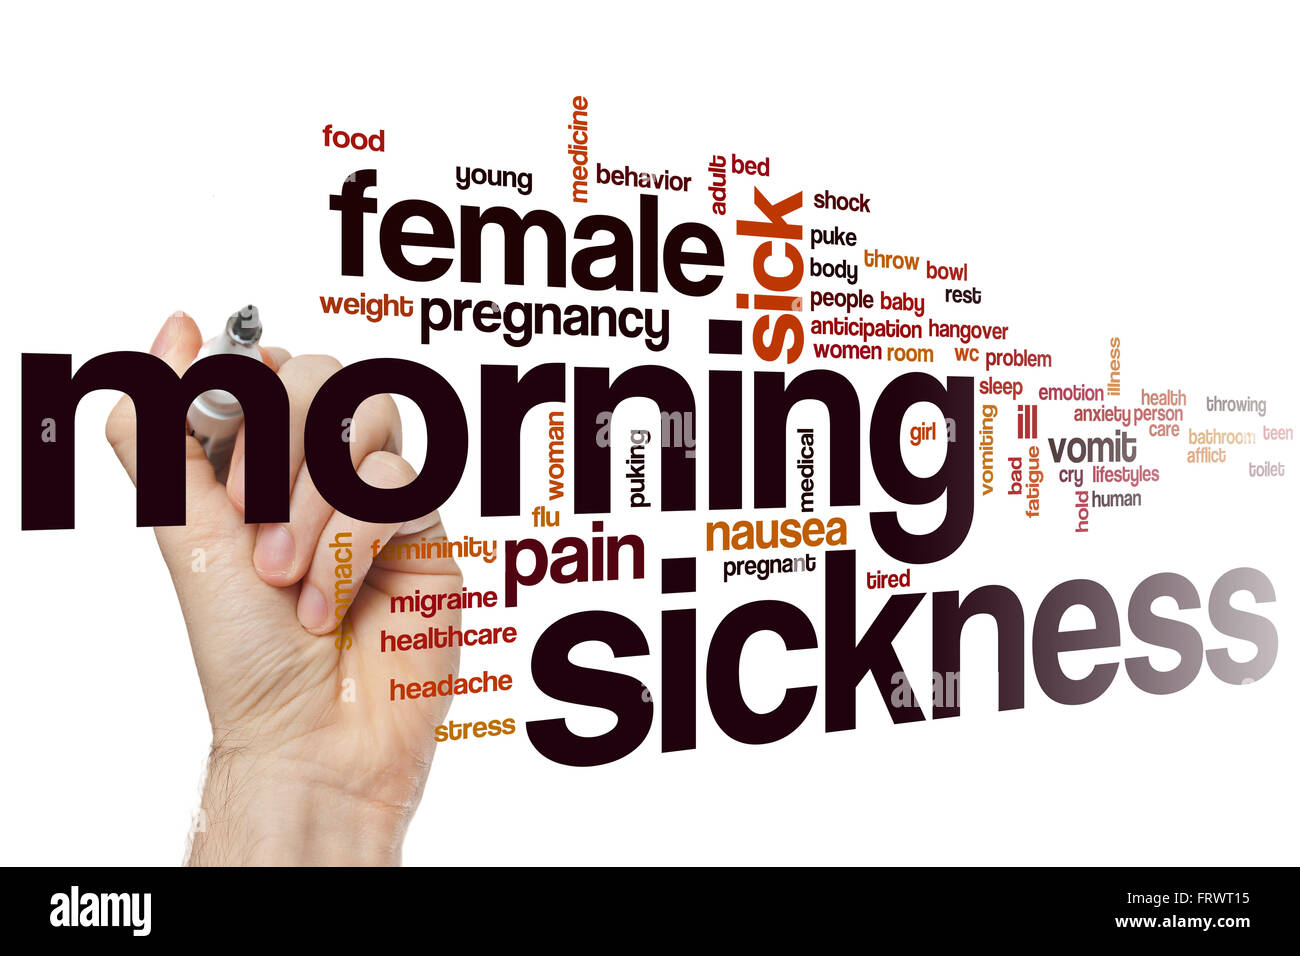 Morning sickness word cloud concept Stock Photo